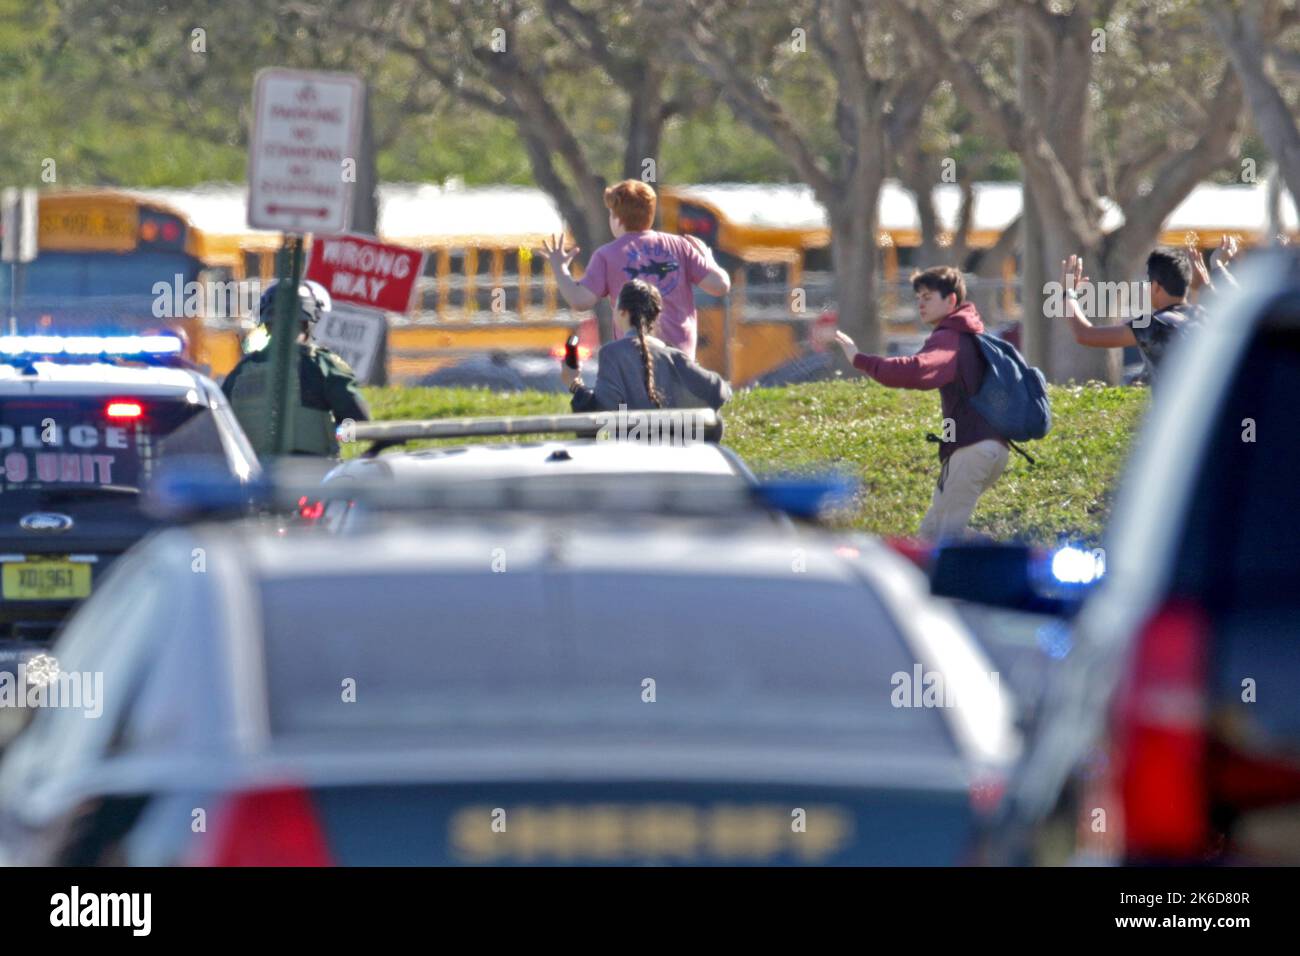 Parkland, USA. 14th Feb, 2018. Students run wth their hands in the air outside of Stoneman Douglas High School in Parkland, Fla., after a shooting on Wednesday, Feb. 14, 2018. (Photo by John McCall/Sun Sentinel/TNS/Sipa USA) Credit: Sipa USA/Alamy Live News Stock Photo